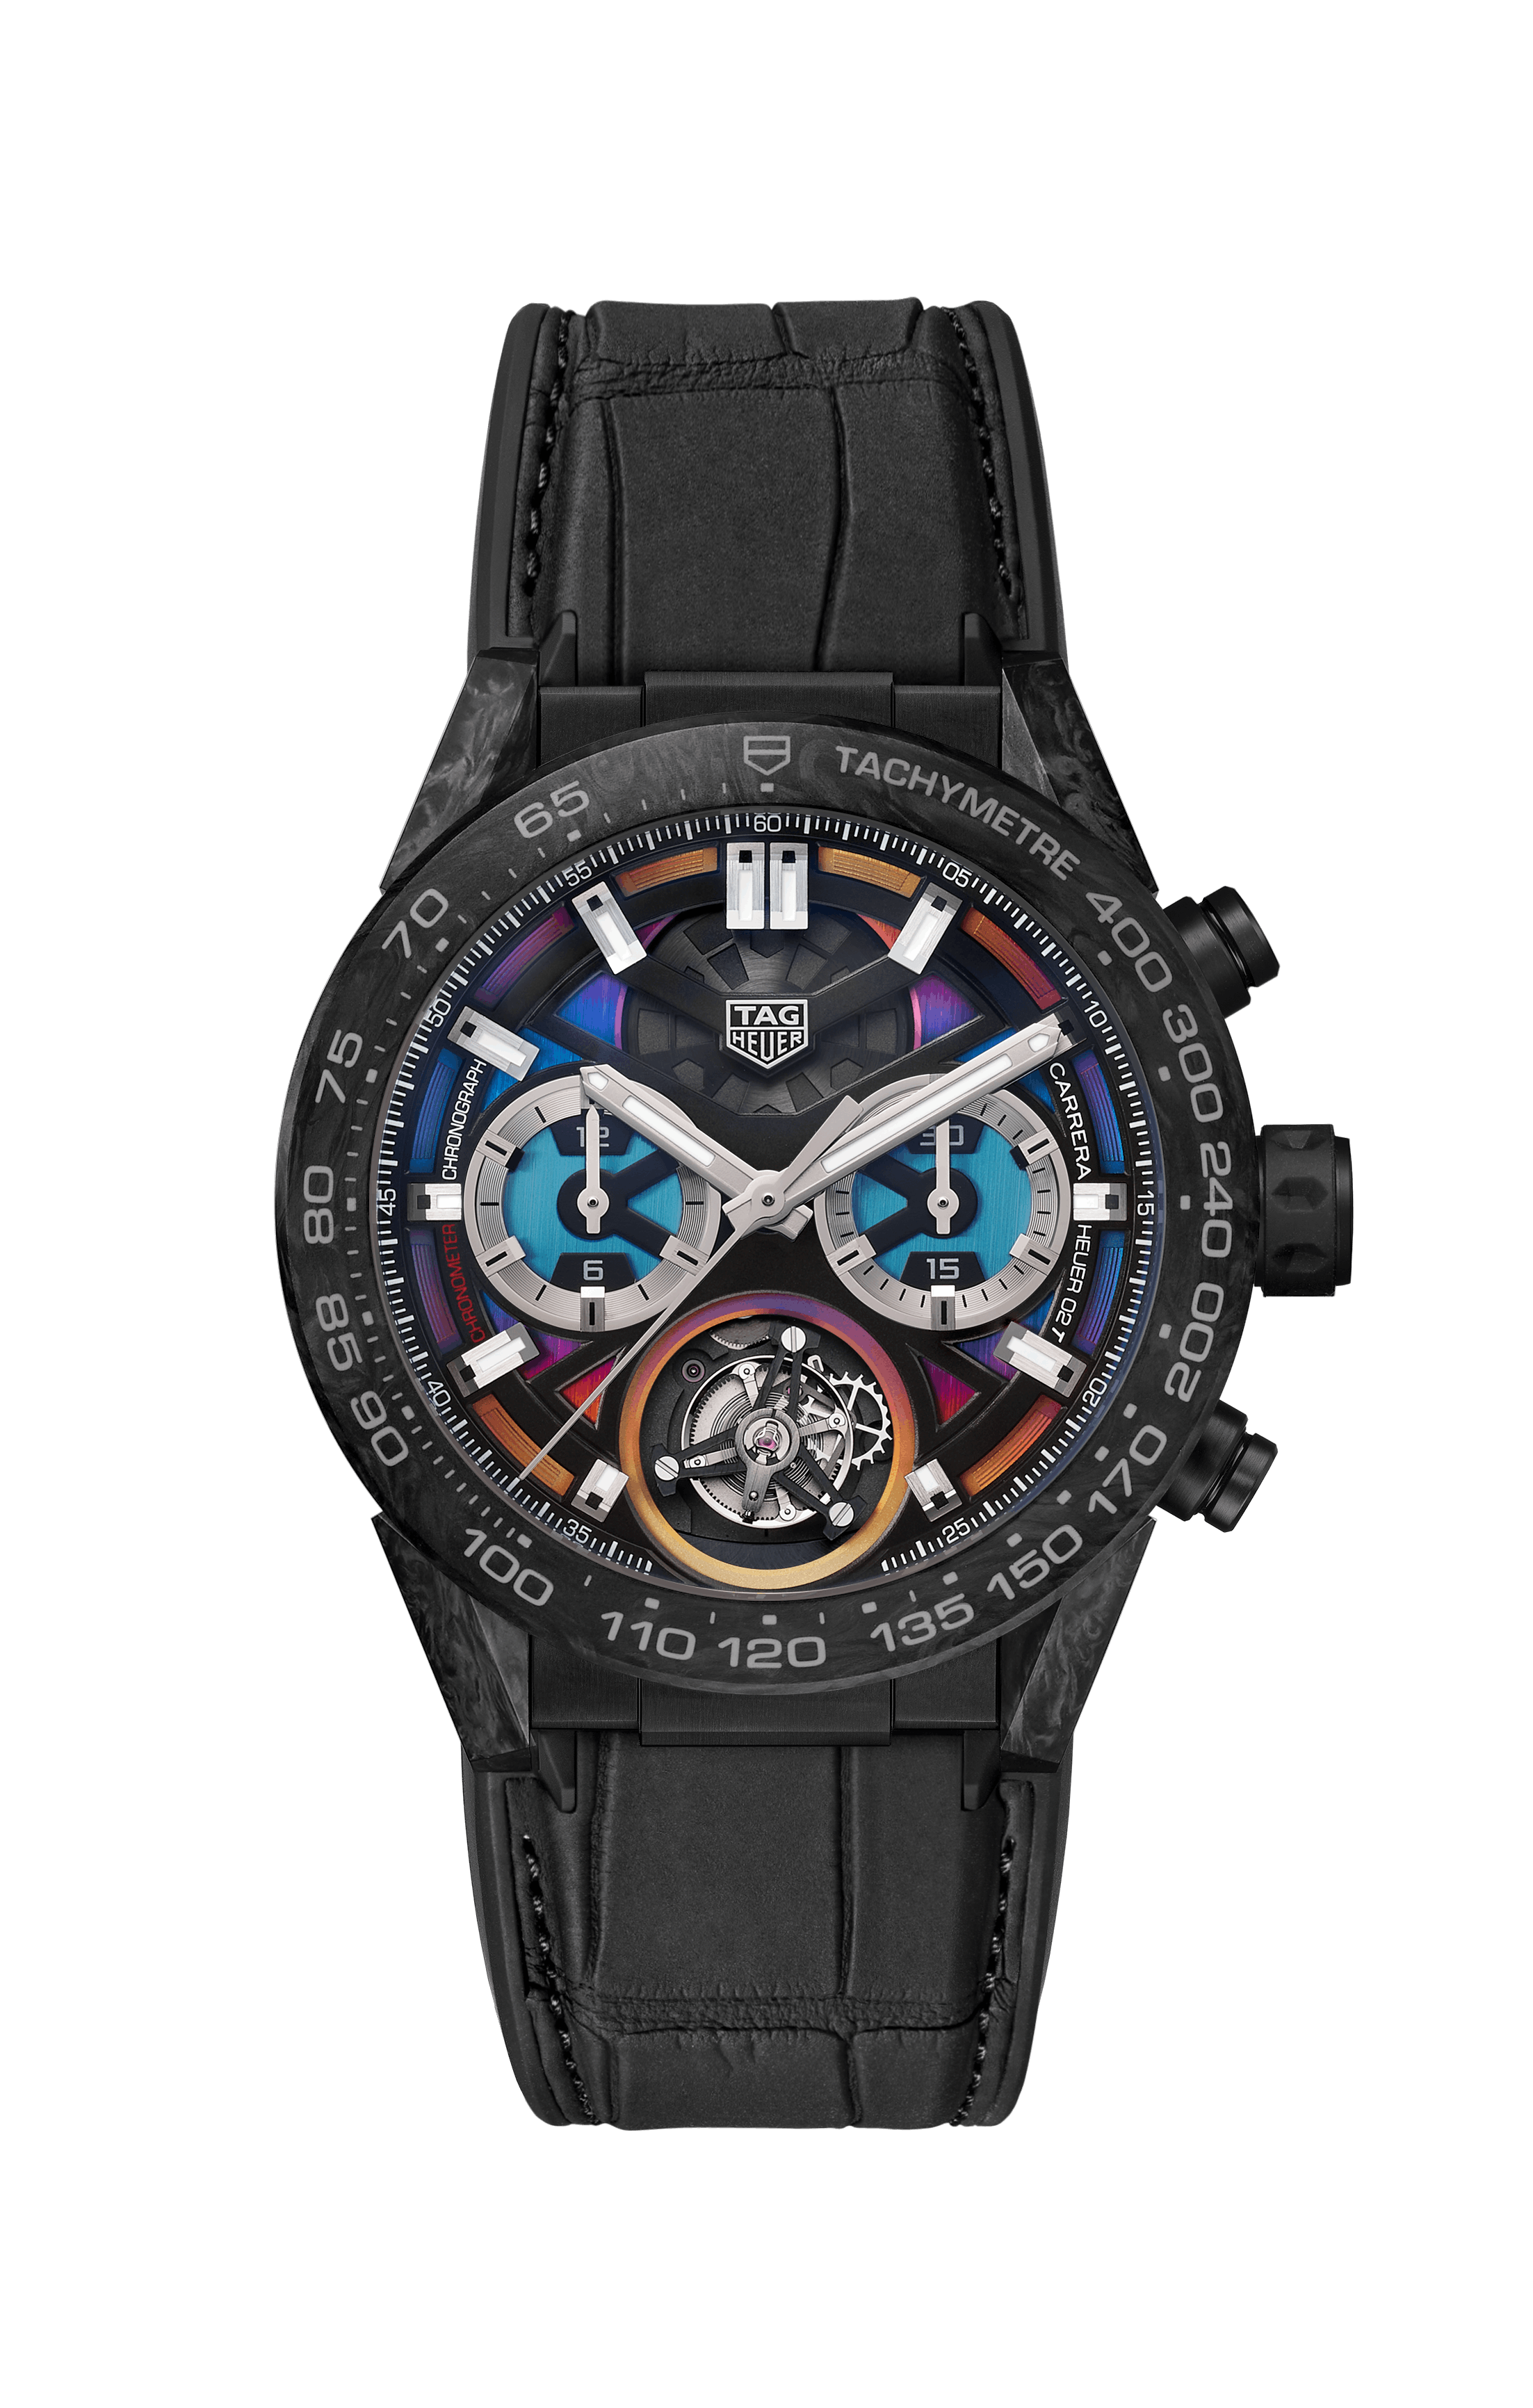 The Latest TAG Heuer Watch Is a Technicolour Dream